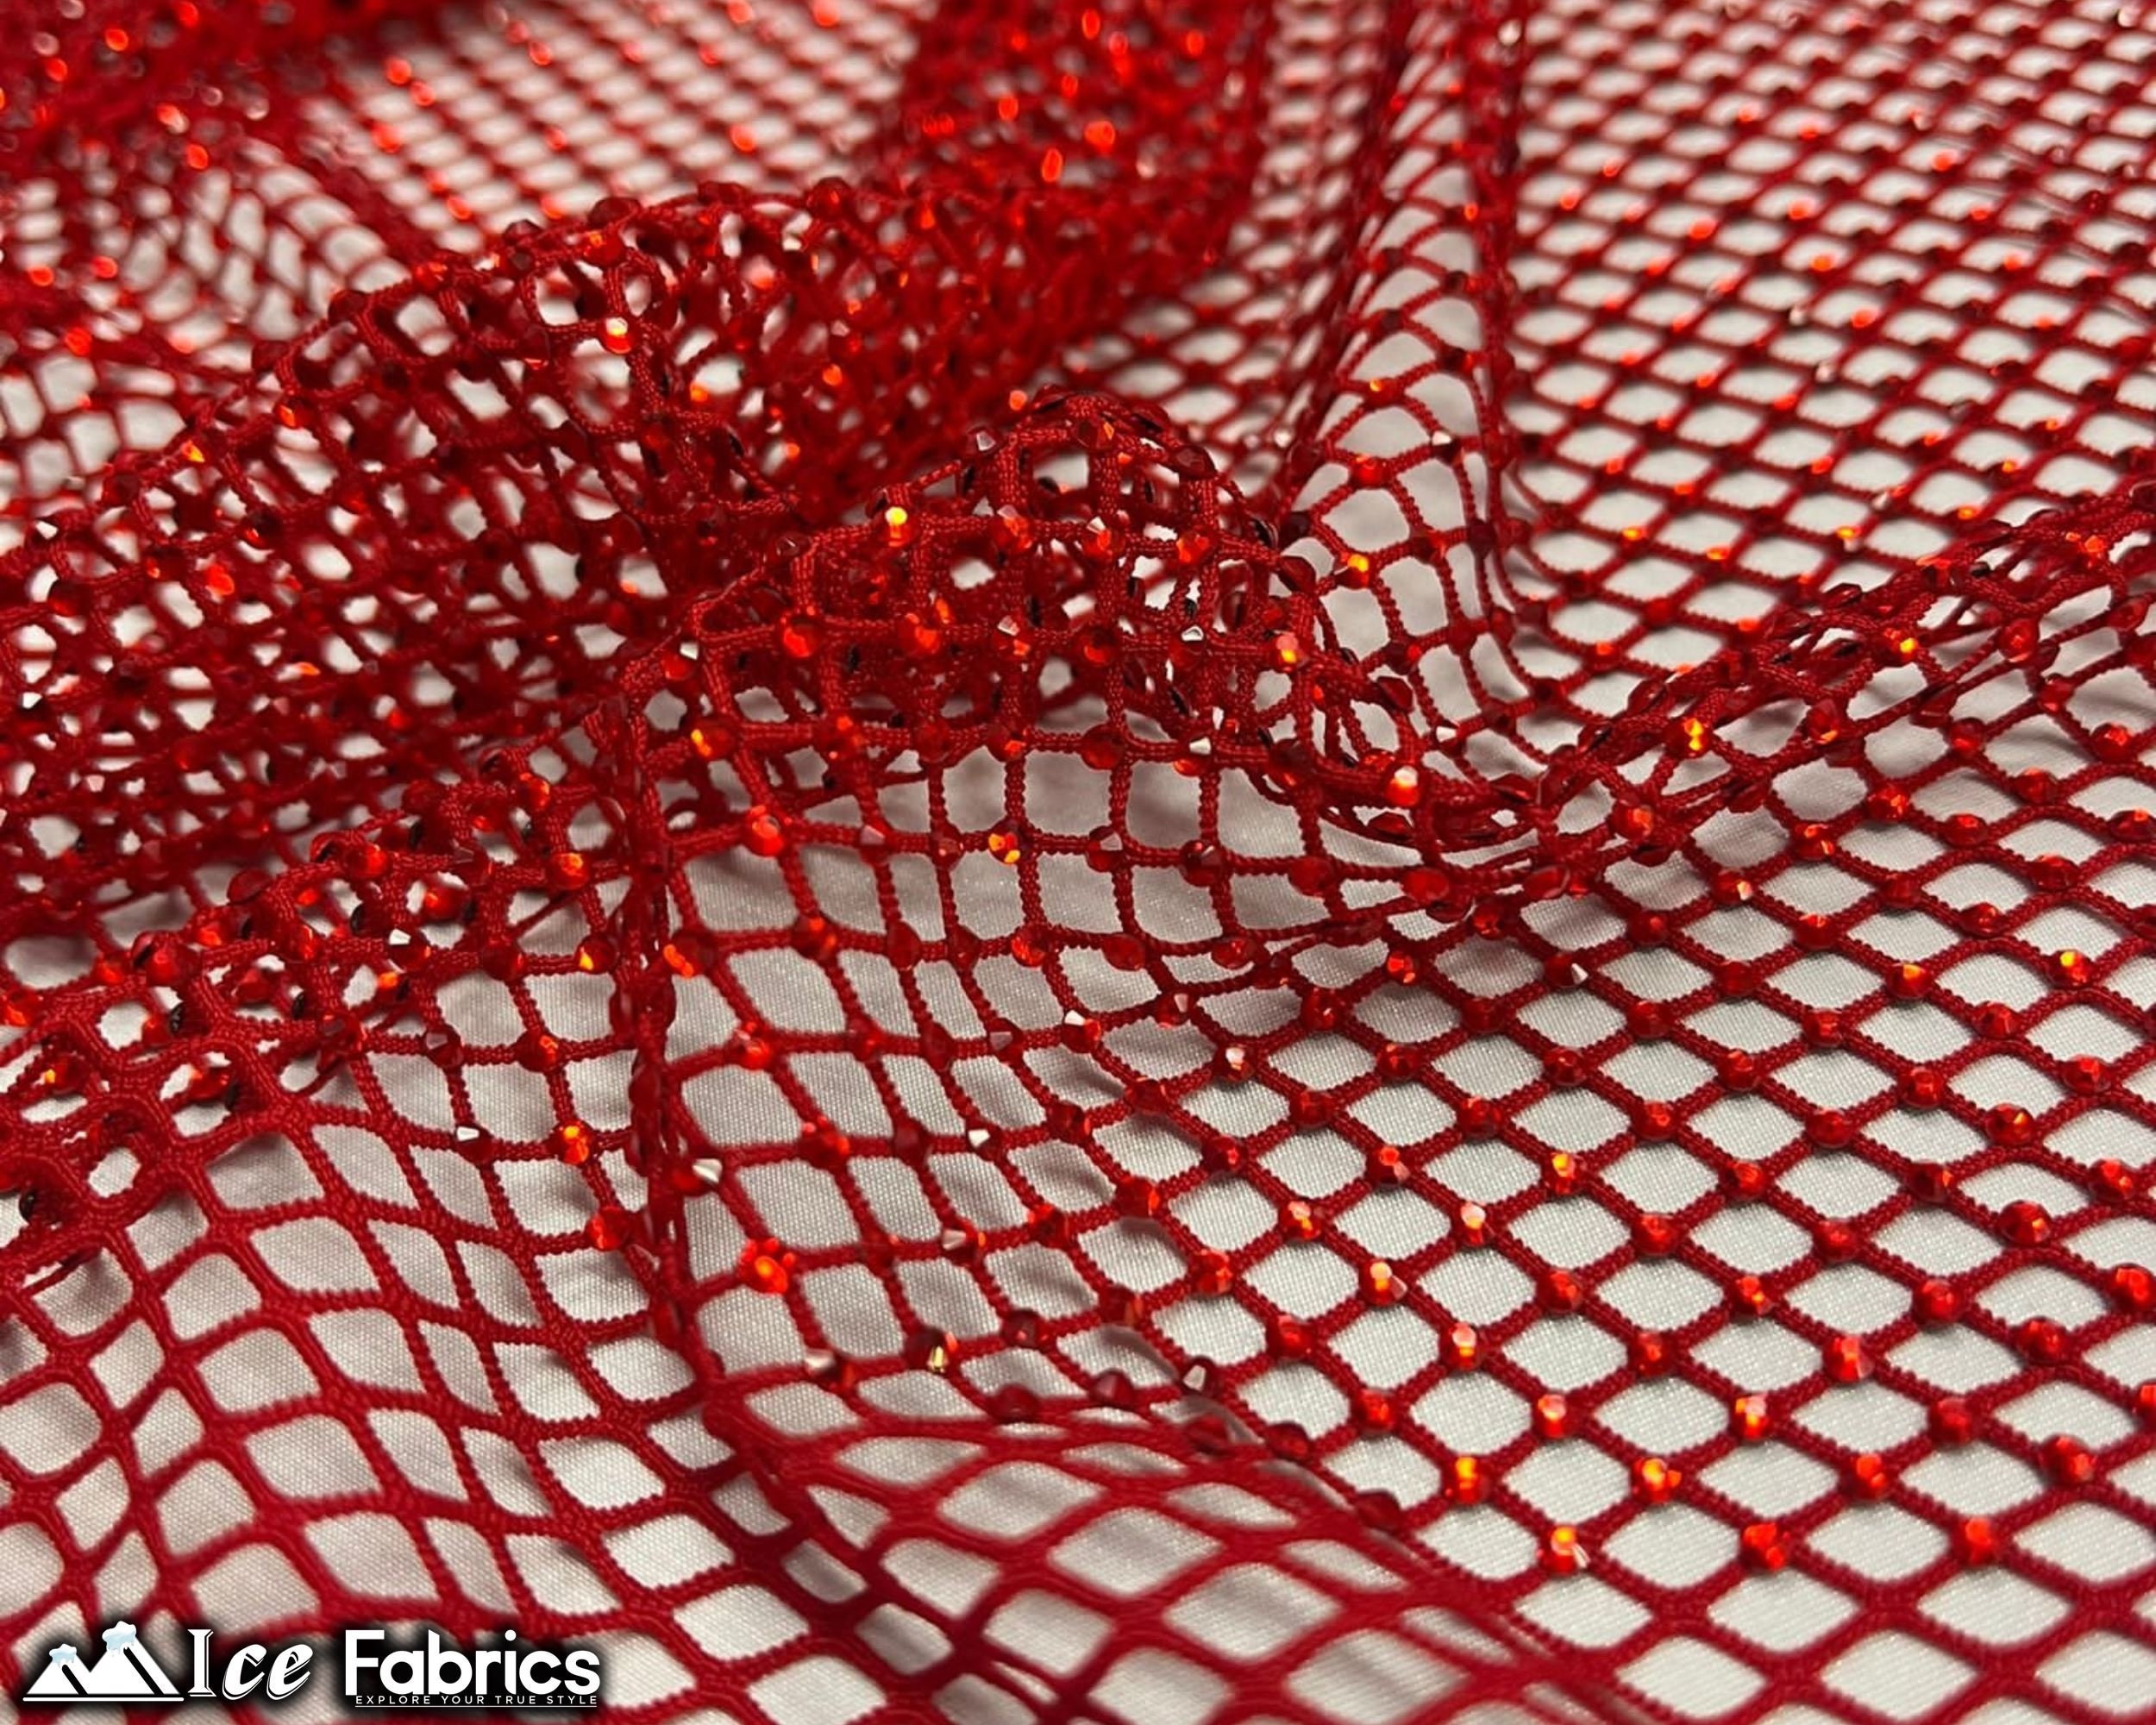 Buy Red Crystal 4 Way Stretch Beaded Fabric on Fish Net Fabric by